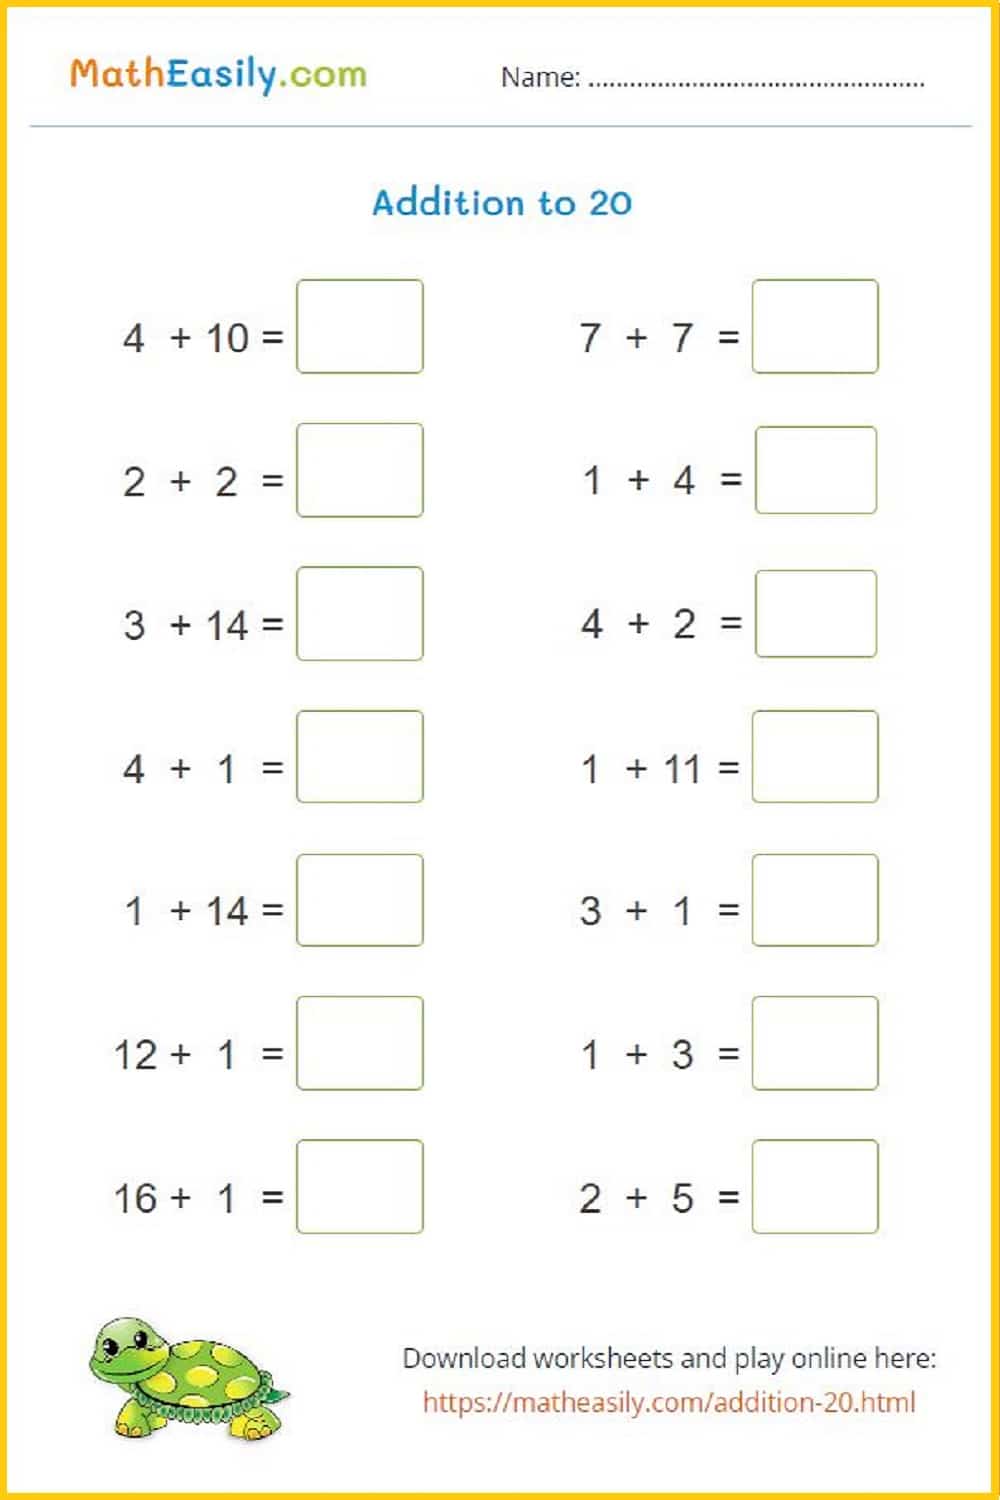 math addition to 30 worksheets free. 
printable addition worksheets up to 30. free addition up to 30 worksheets for grade 1.